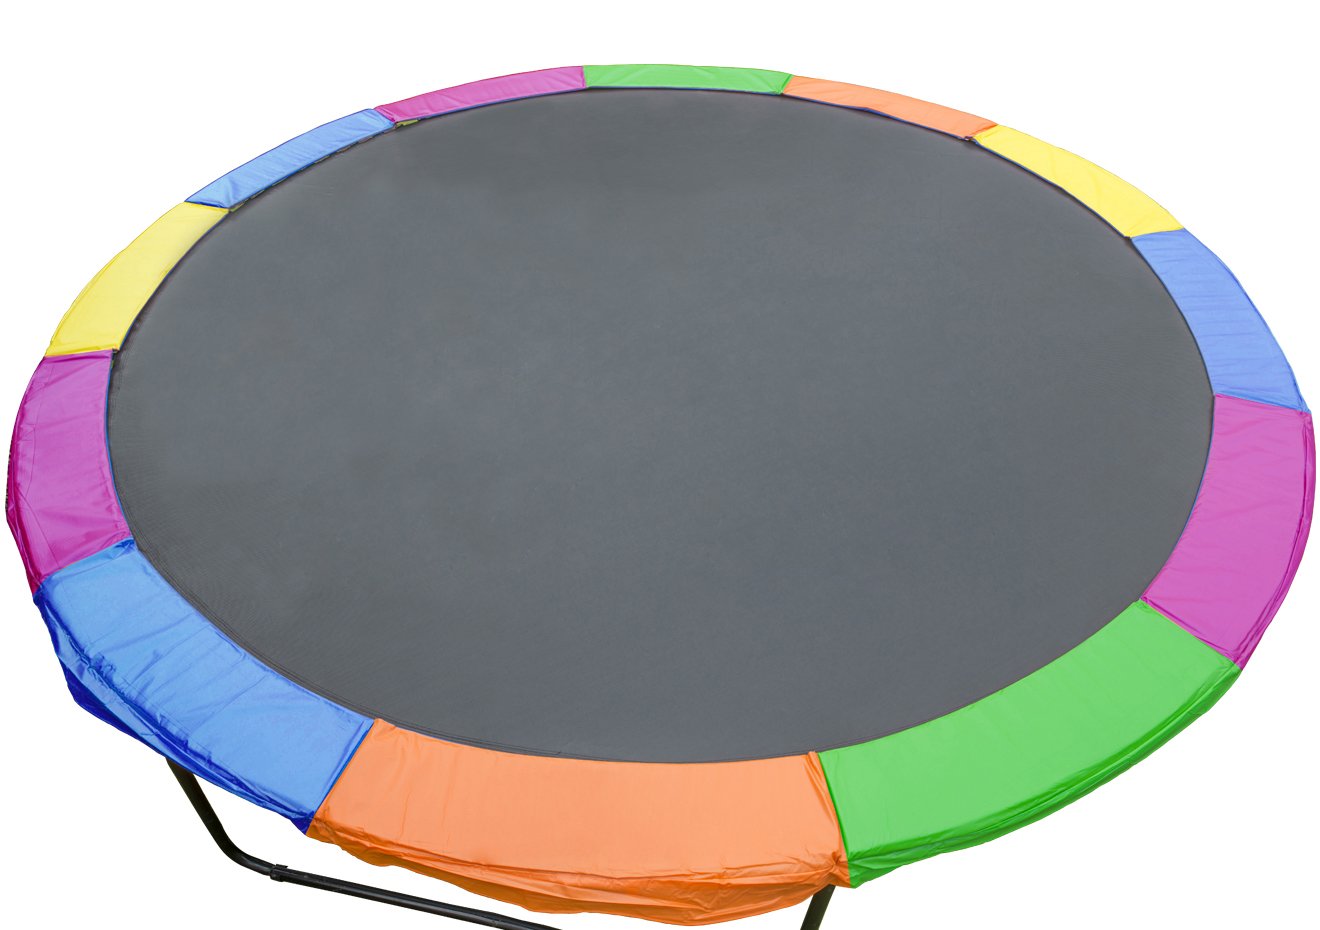 Replacement Trampoline Pad Outdoor Round Spring Cover 8 ft - Rainbow 2